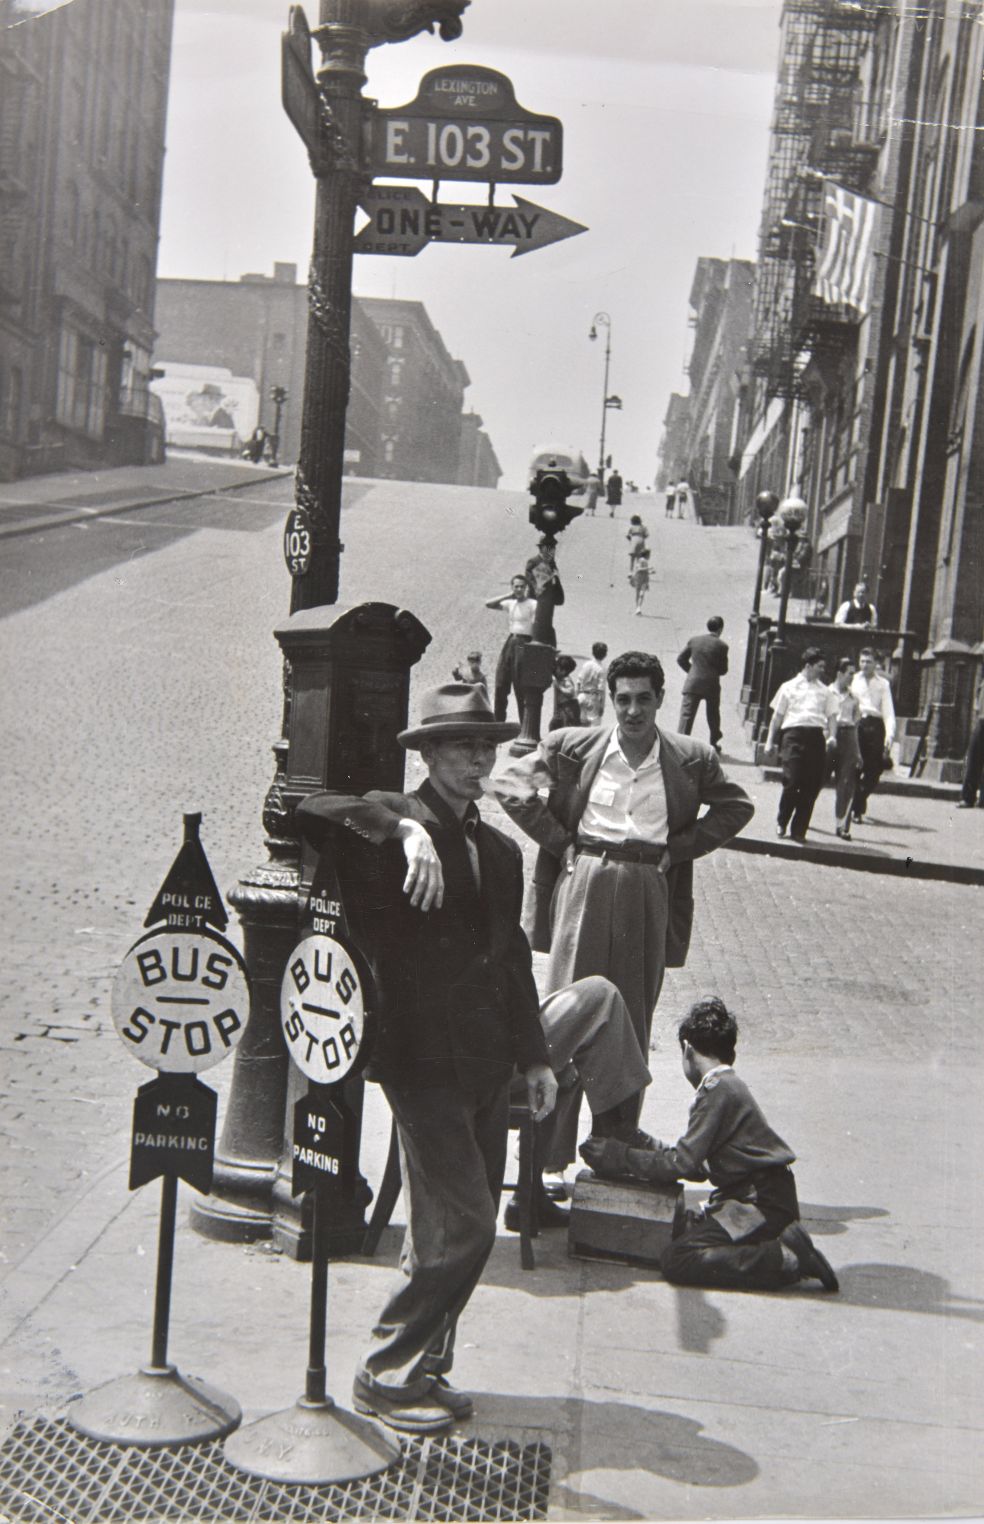 *Cartier-Bresson (Henri, 1908-2004). The American Scene, 1948, printed later, a group of four